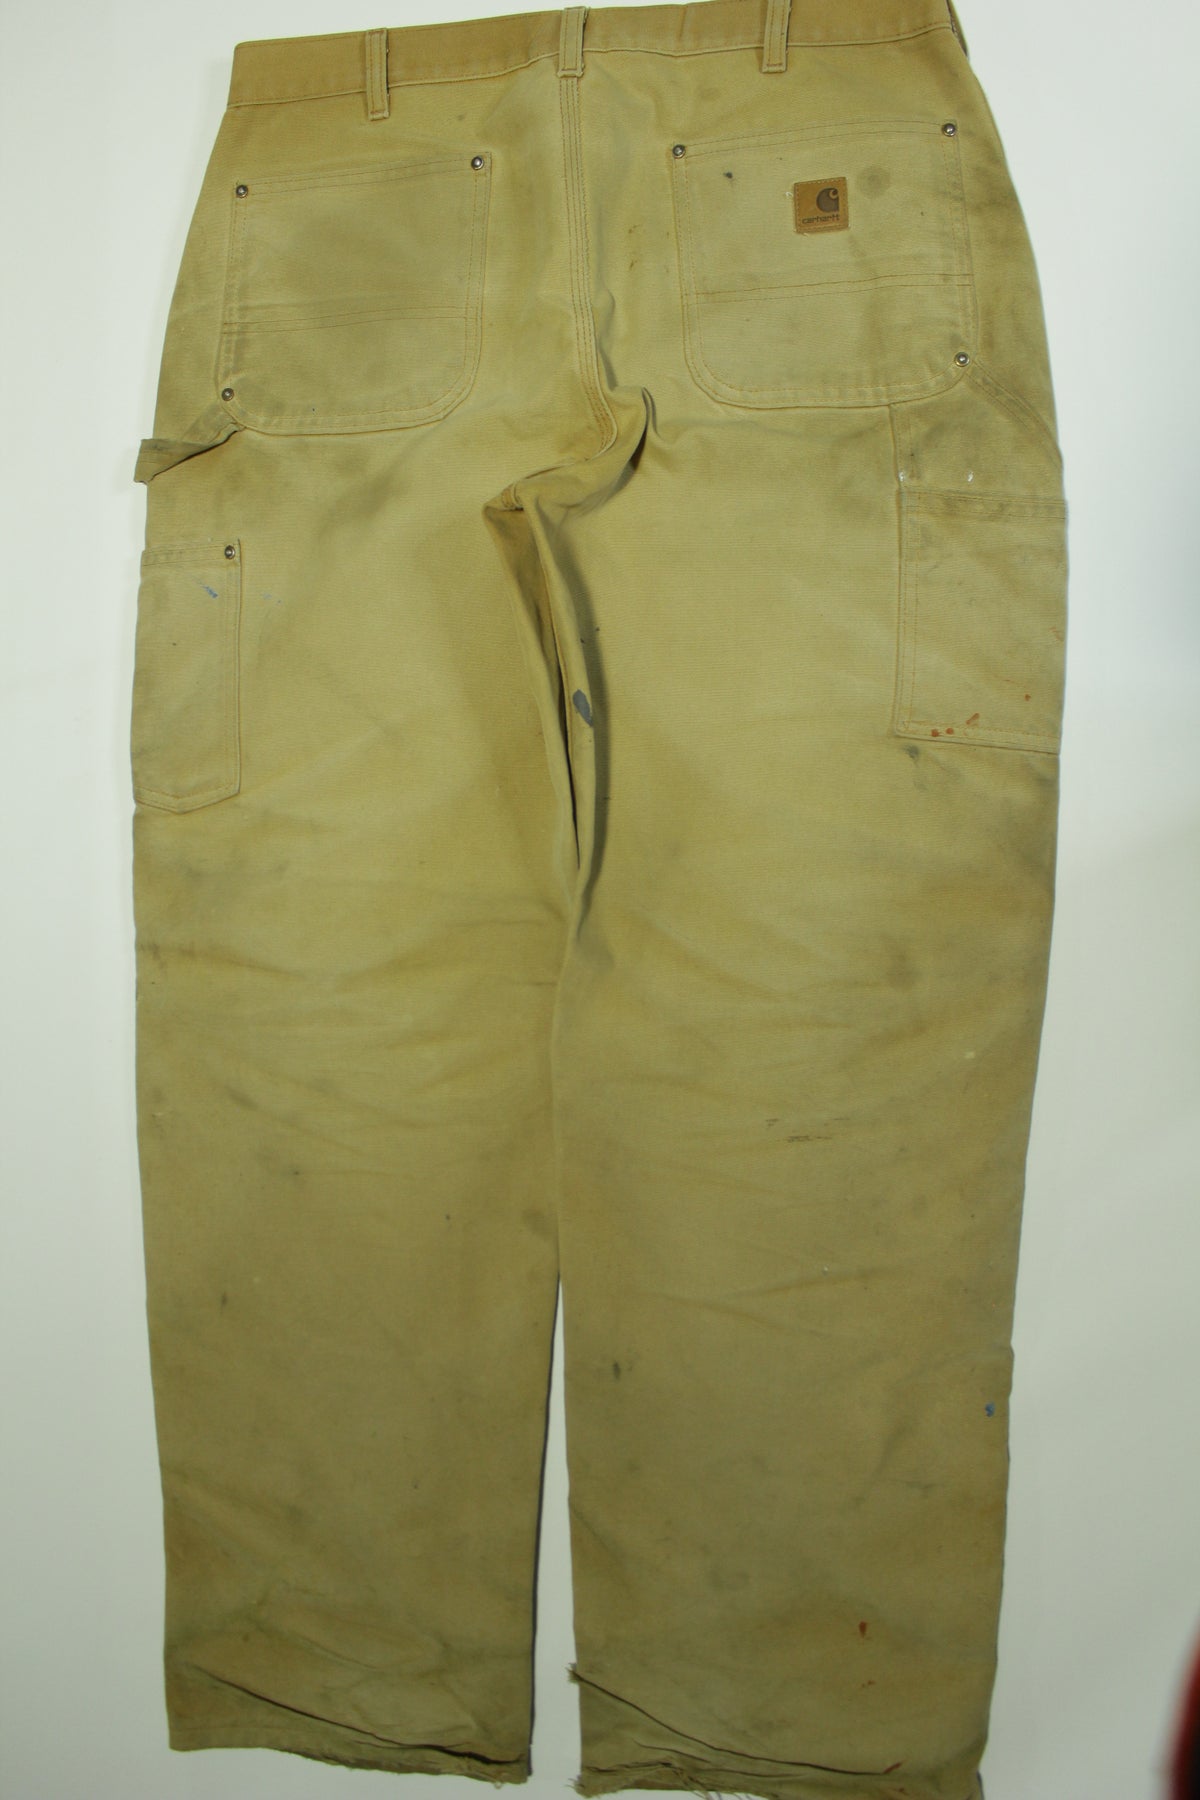 Carhartt B136 BRN Dungaree Fit Duck Wash Canvas Double Knee Front Work Construction Pants